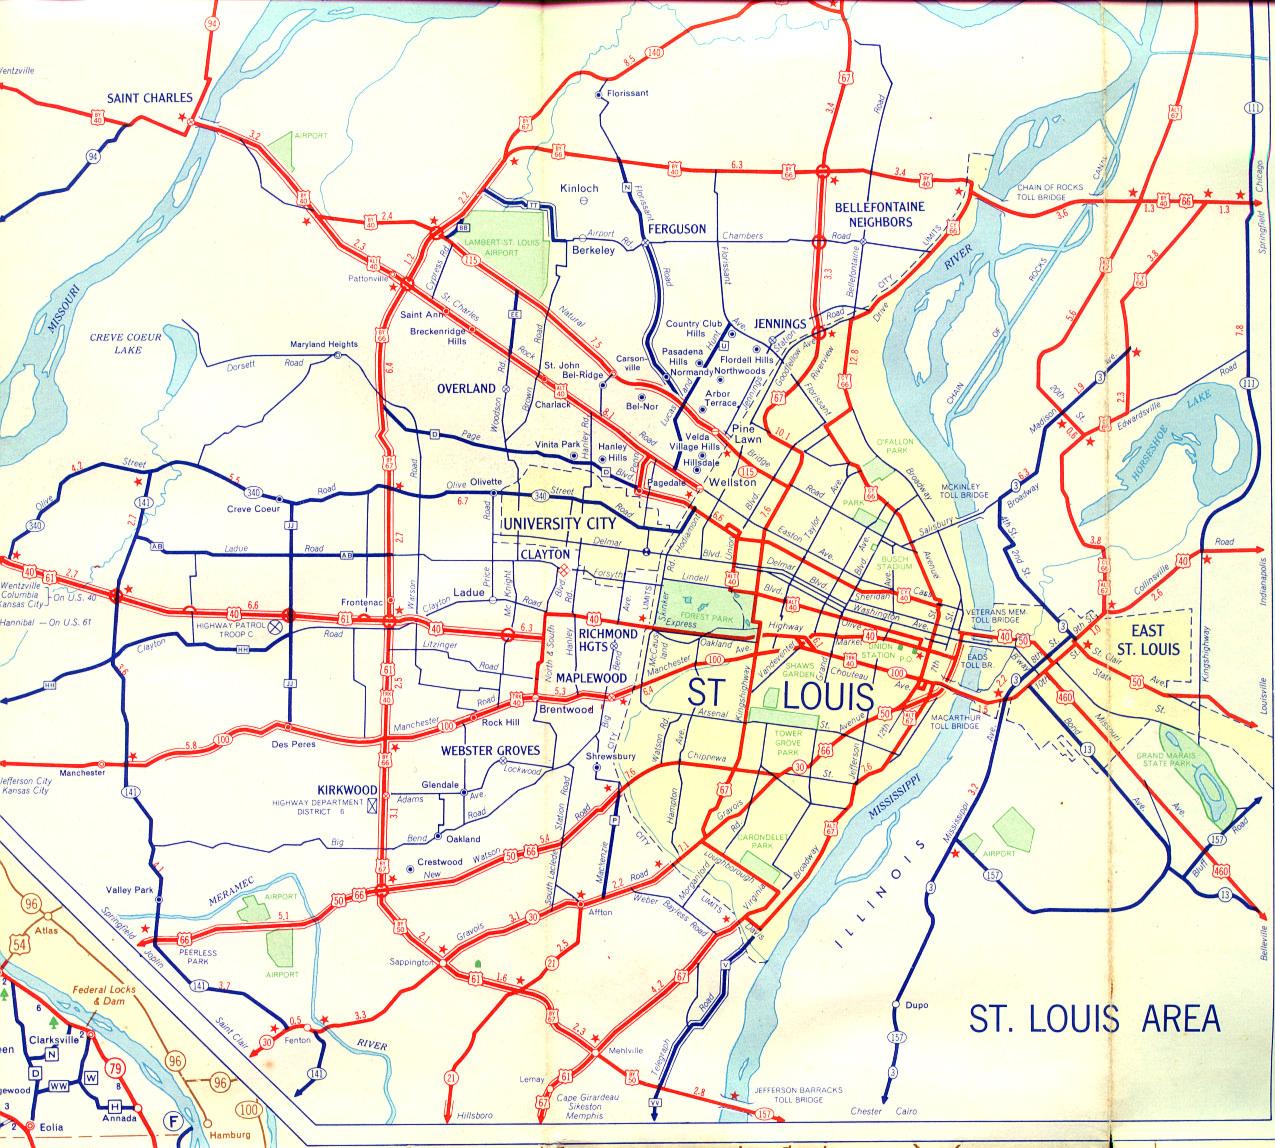 Inset map for St. Louis, Mo. (1956)